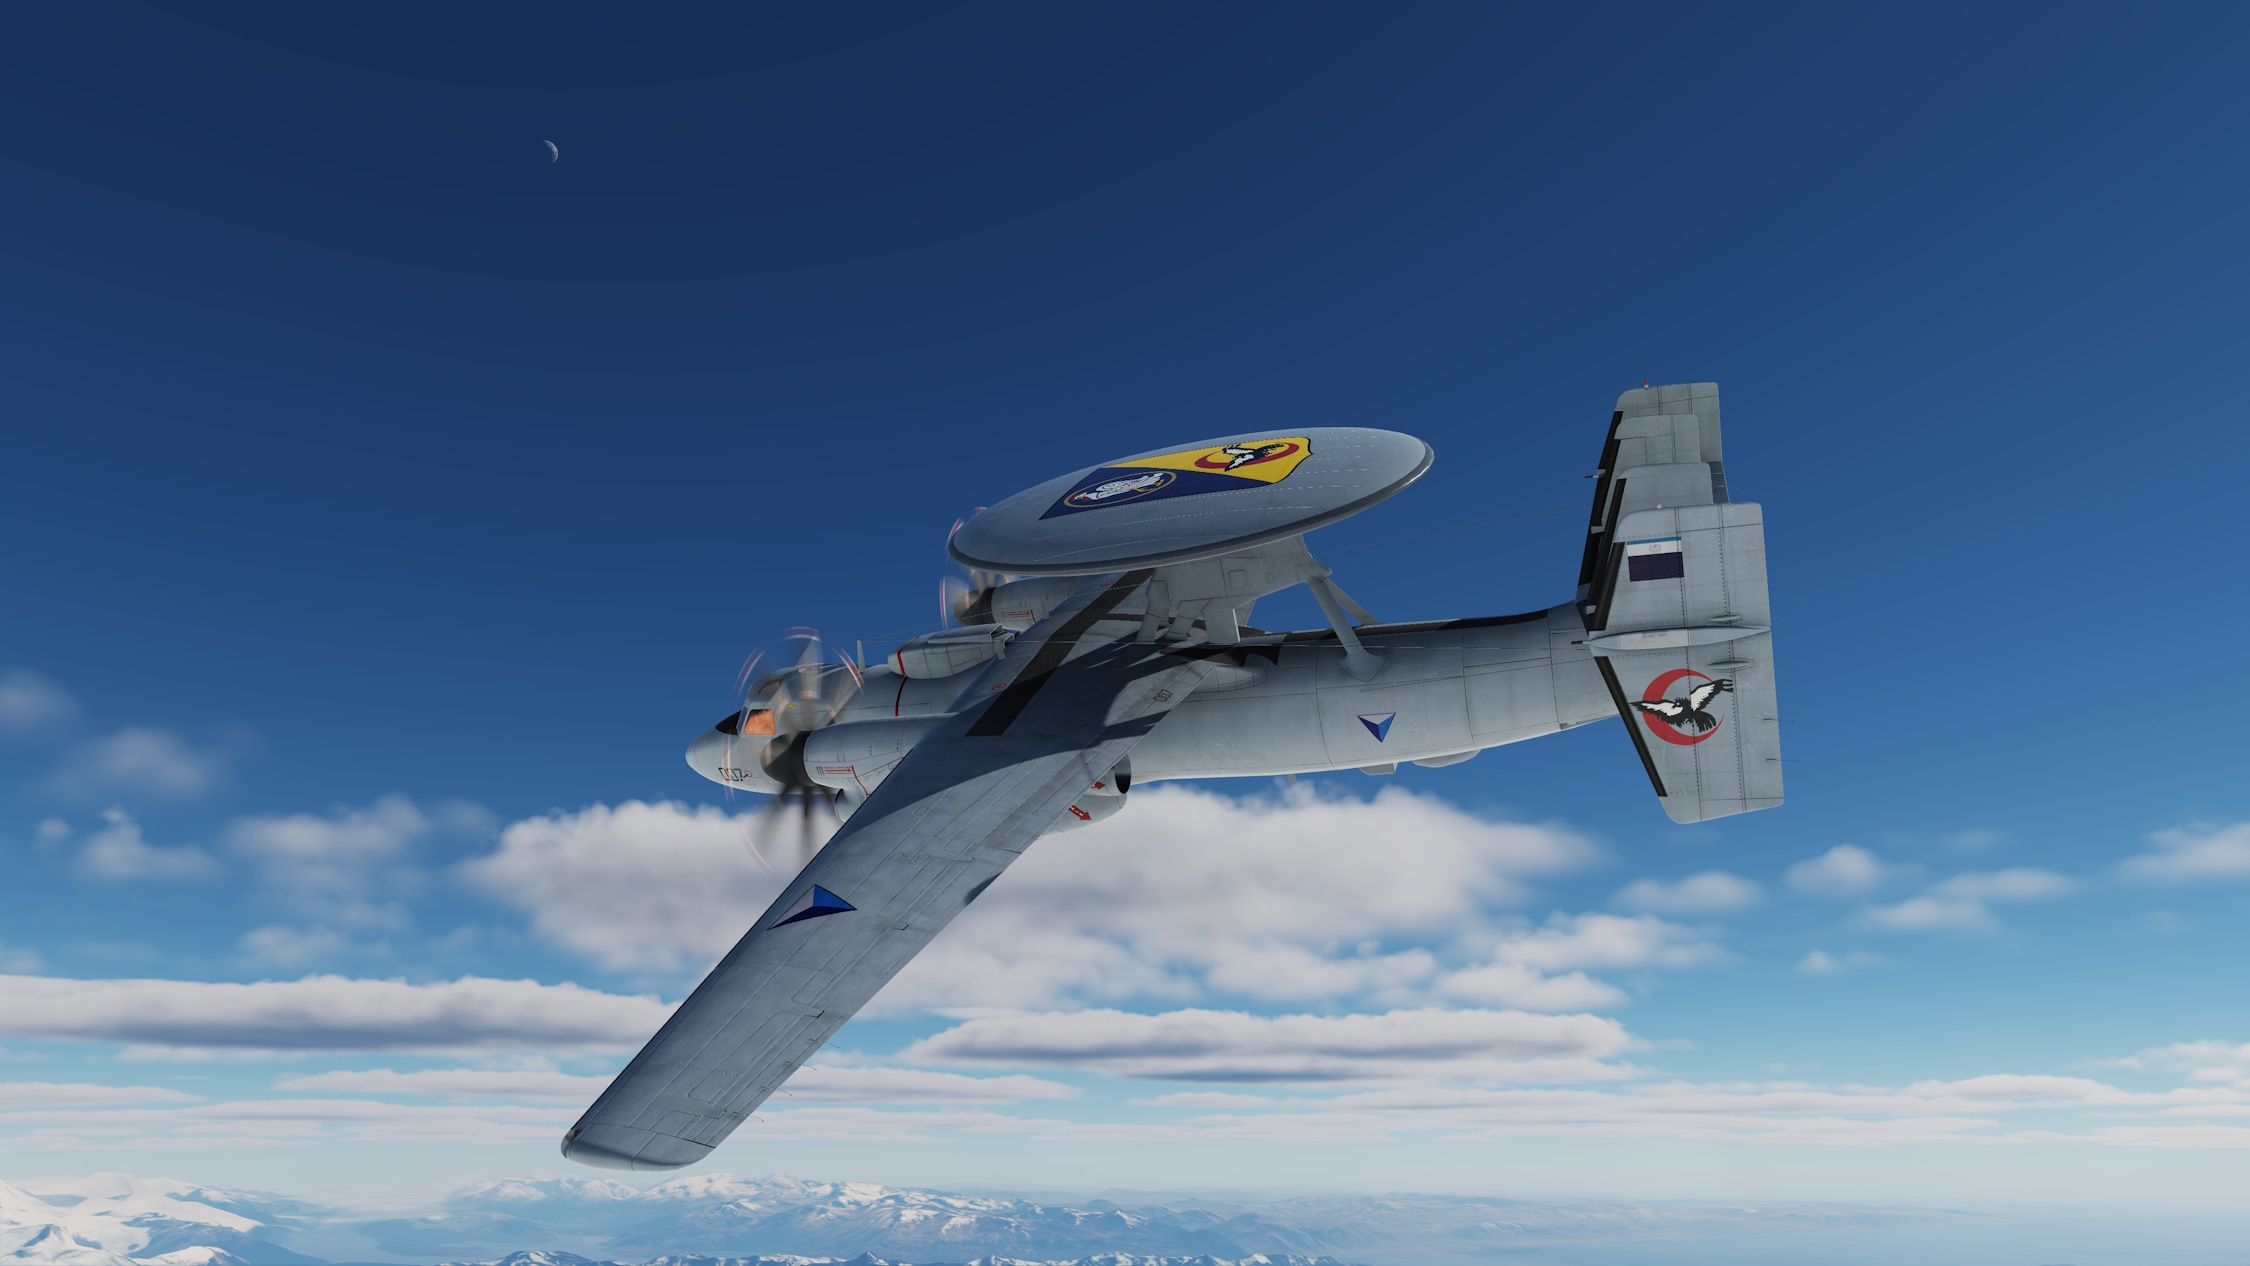 ACE COMBAT - E-2 - Nordennavic Royal Air Force - Sqn "Berry" Late